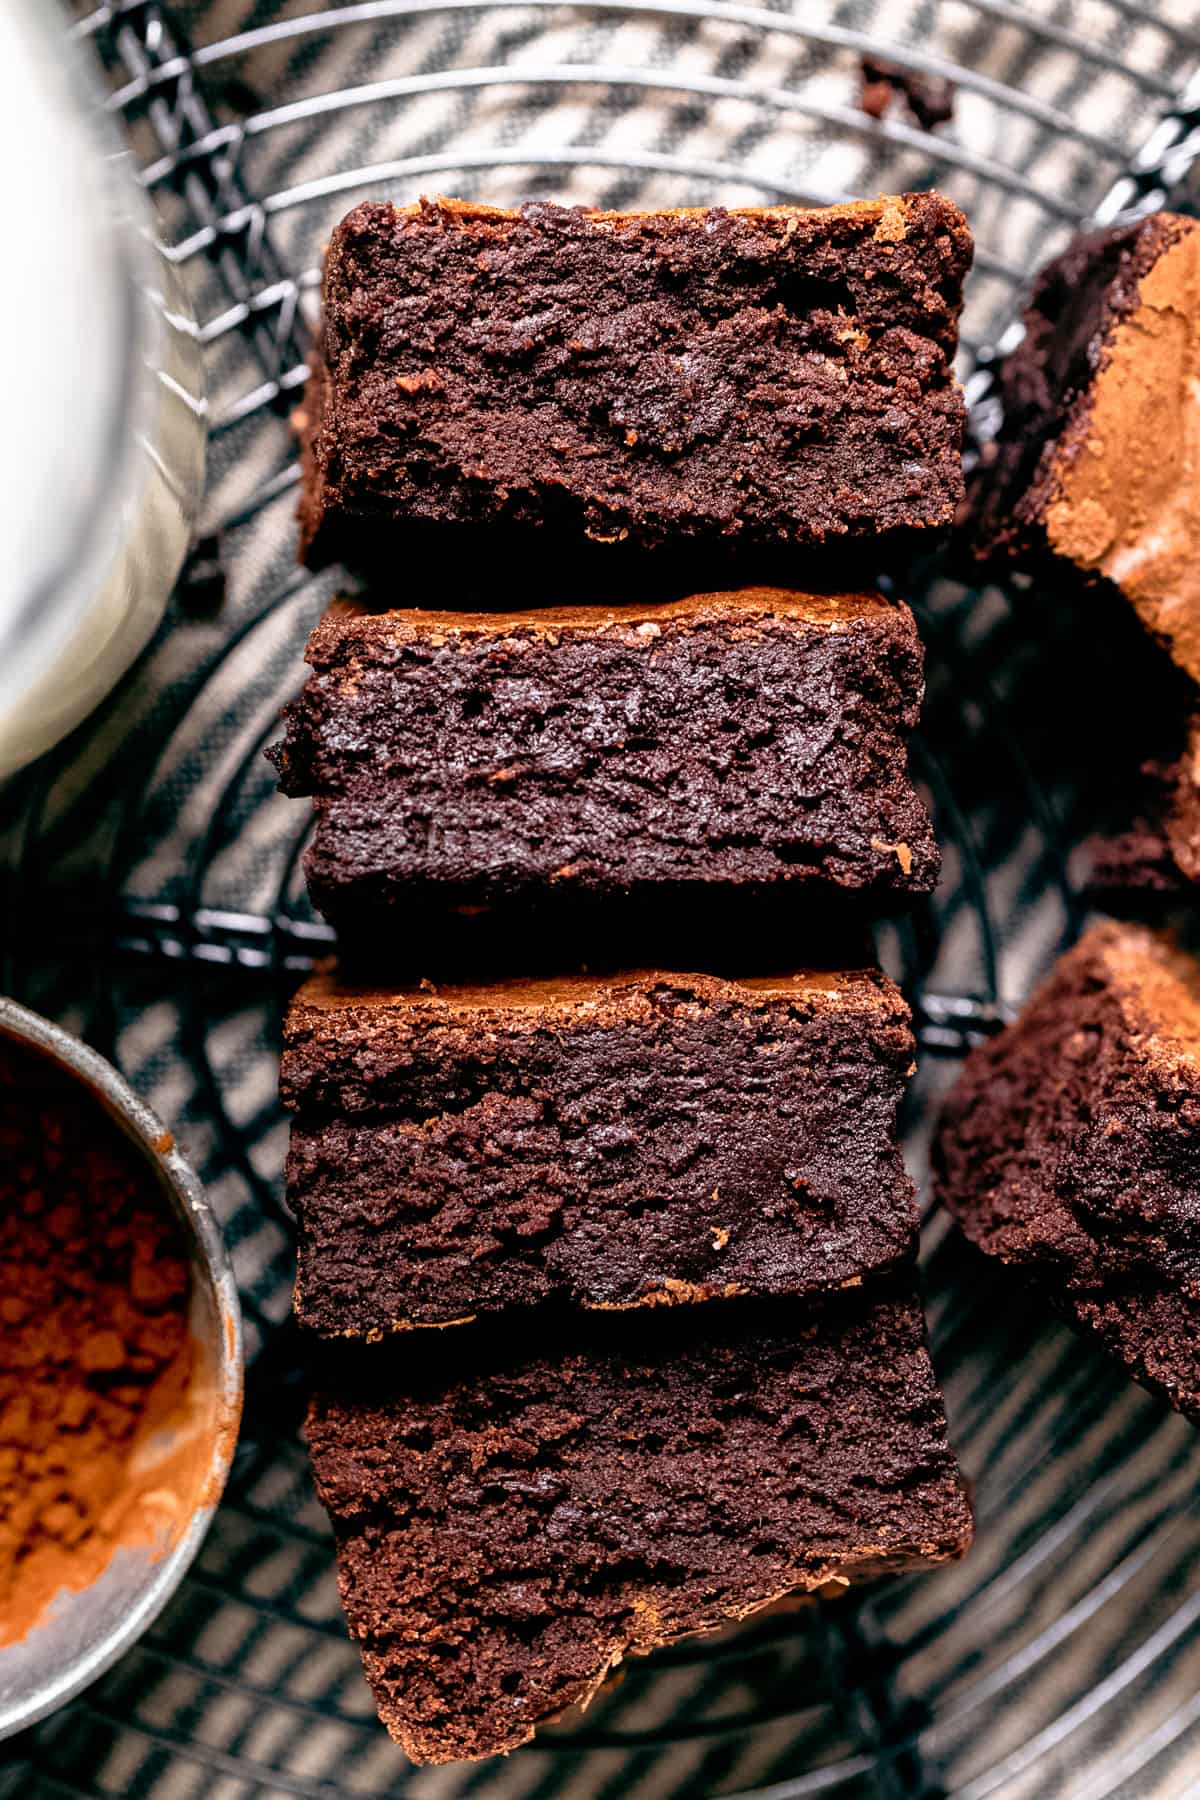 The Best Homemade Brownies (with Video!) | The Recipe Rebel